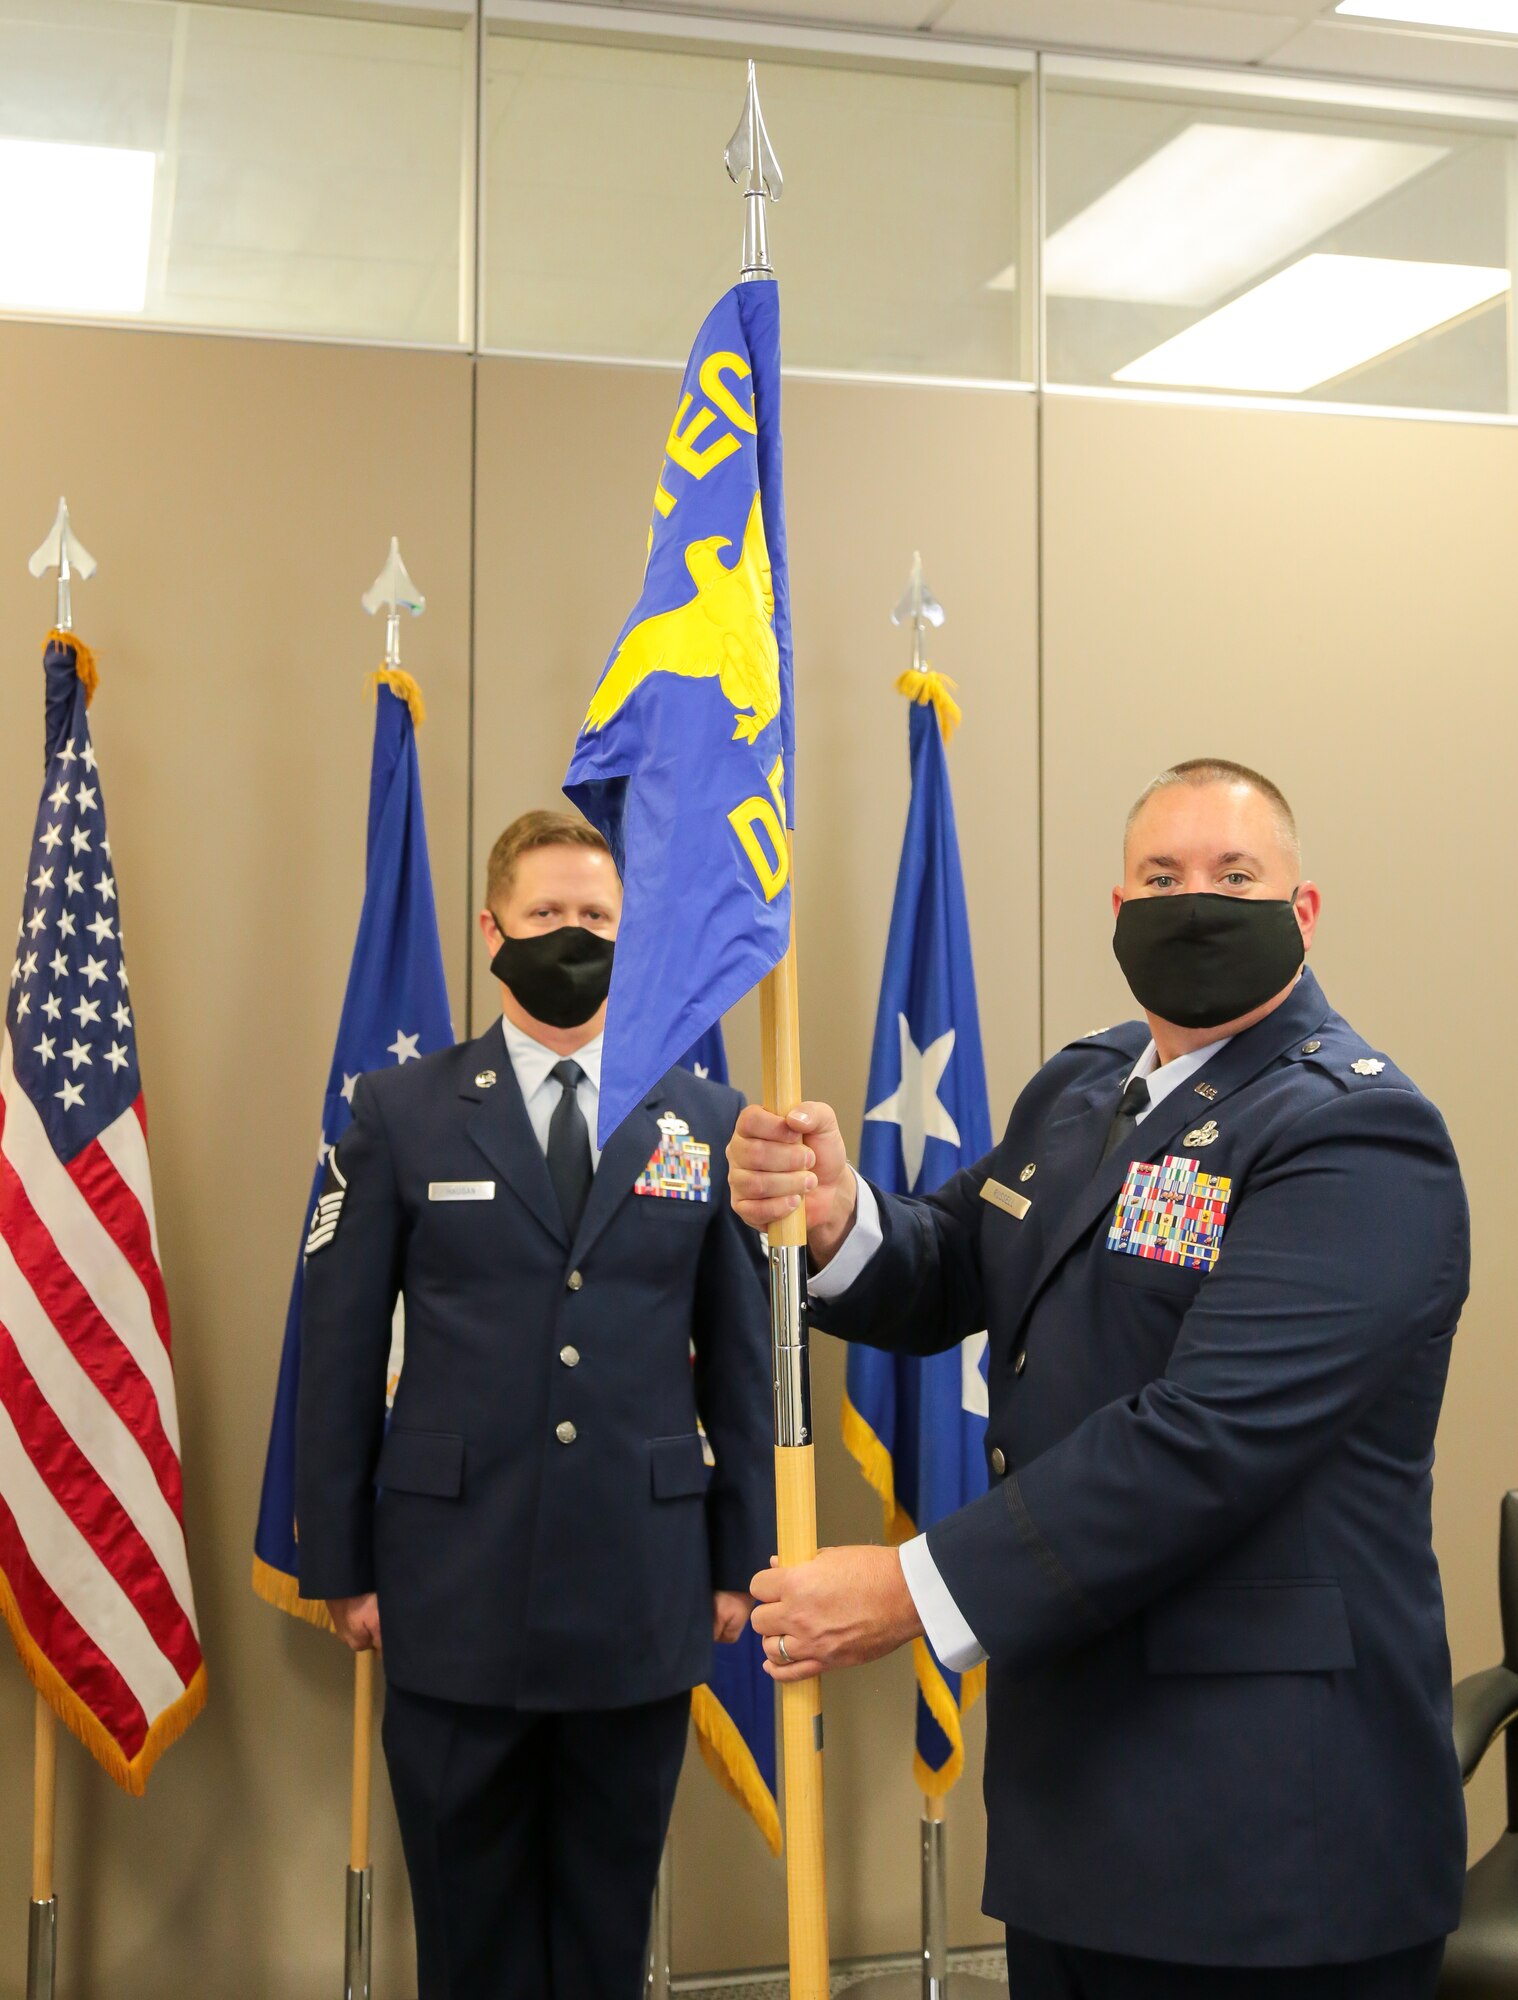 Lt. Col. Jeremy Russell holds the Air Force Operational Test and Evaluation Center Detachment 3 guidon.